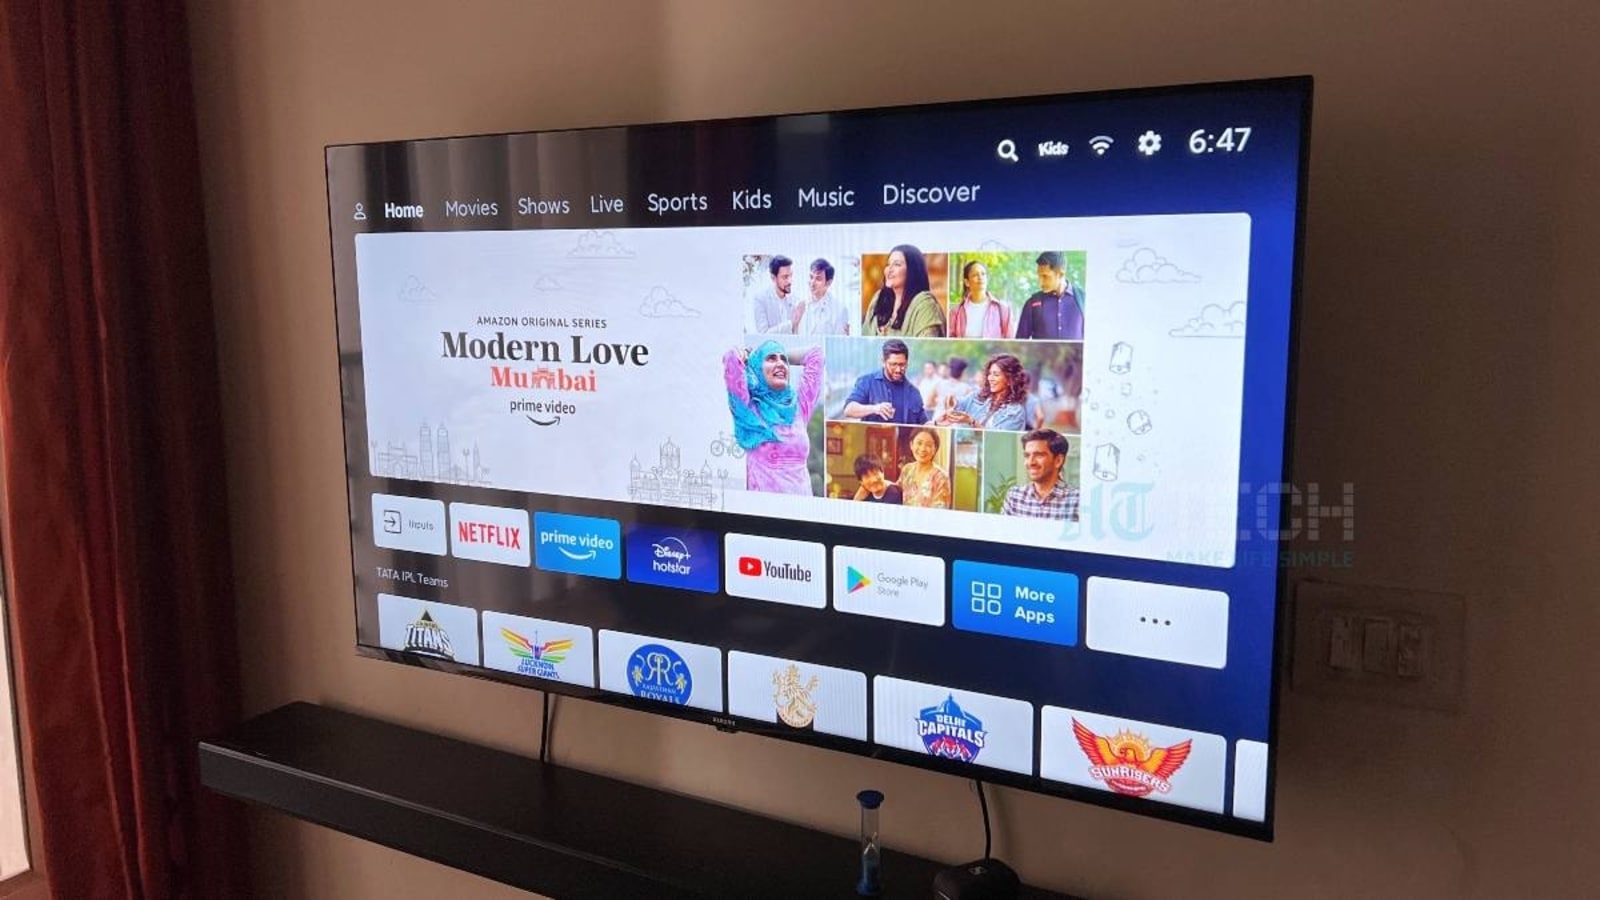 Mi 5A 40 inches (100 cm) Full HD LED Android Smart TV